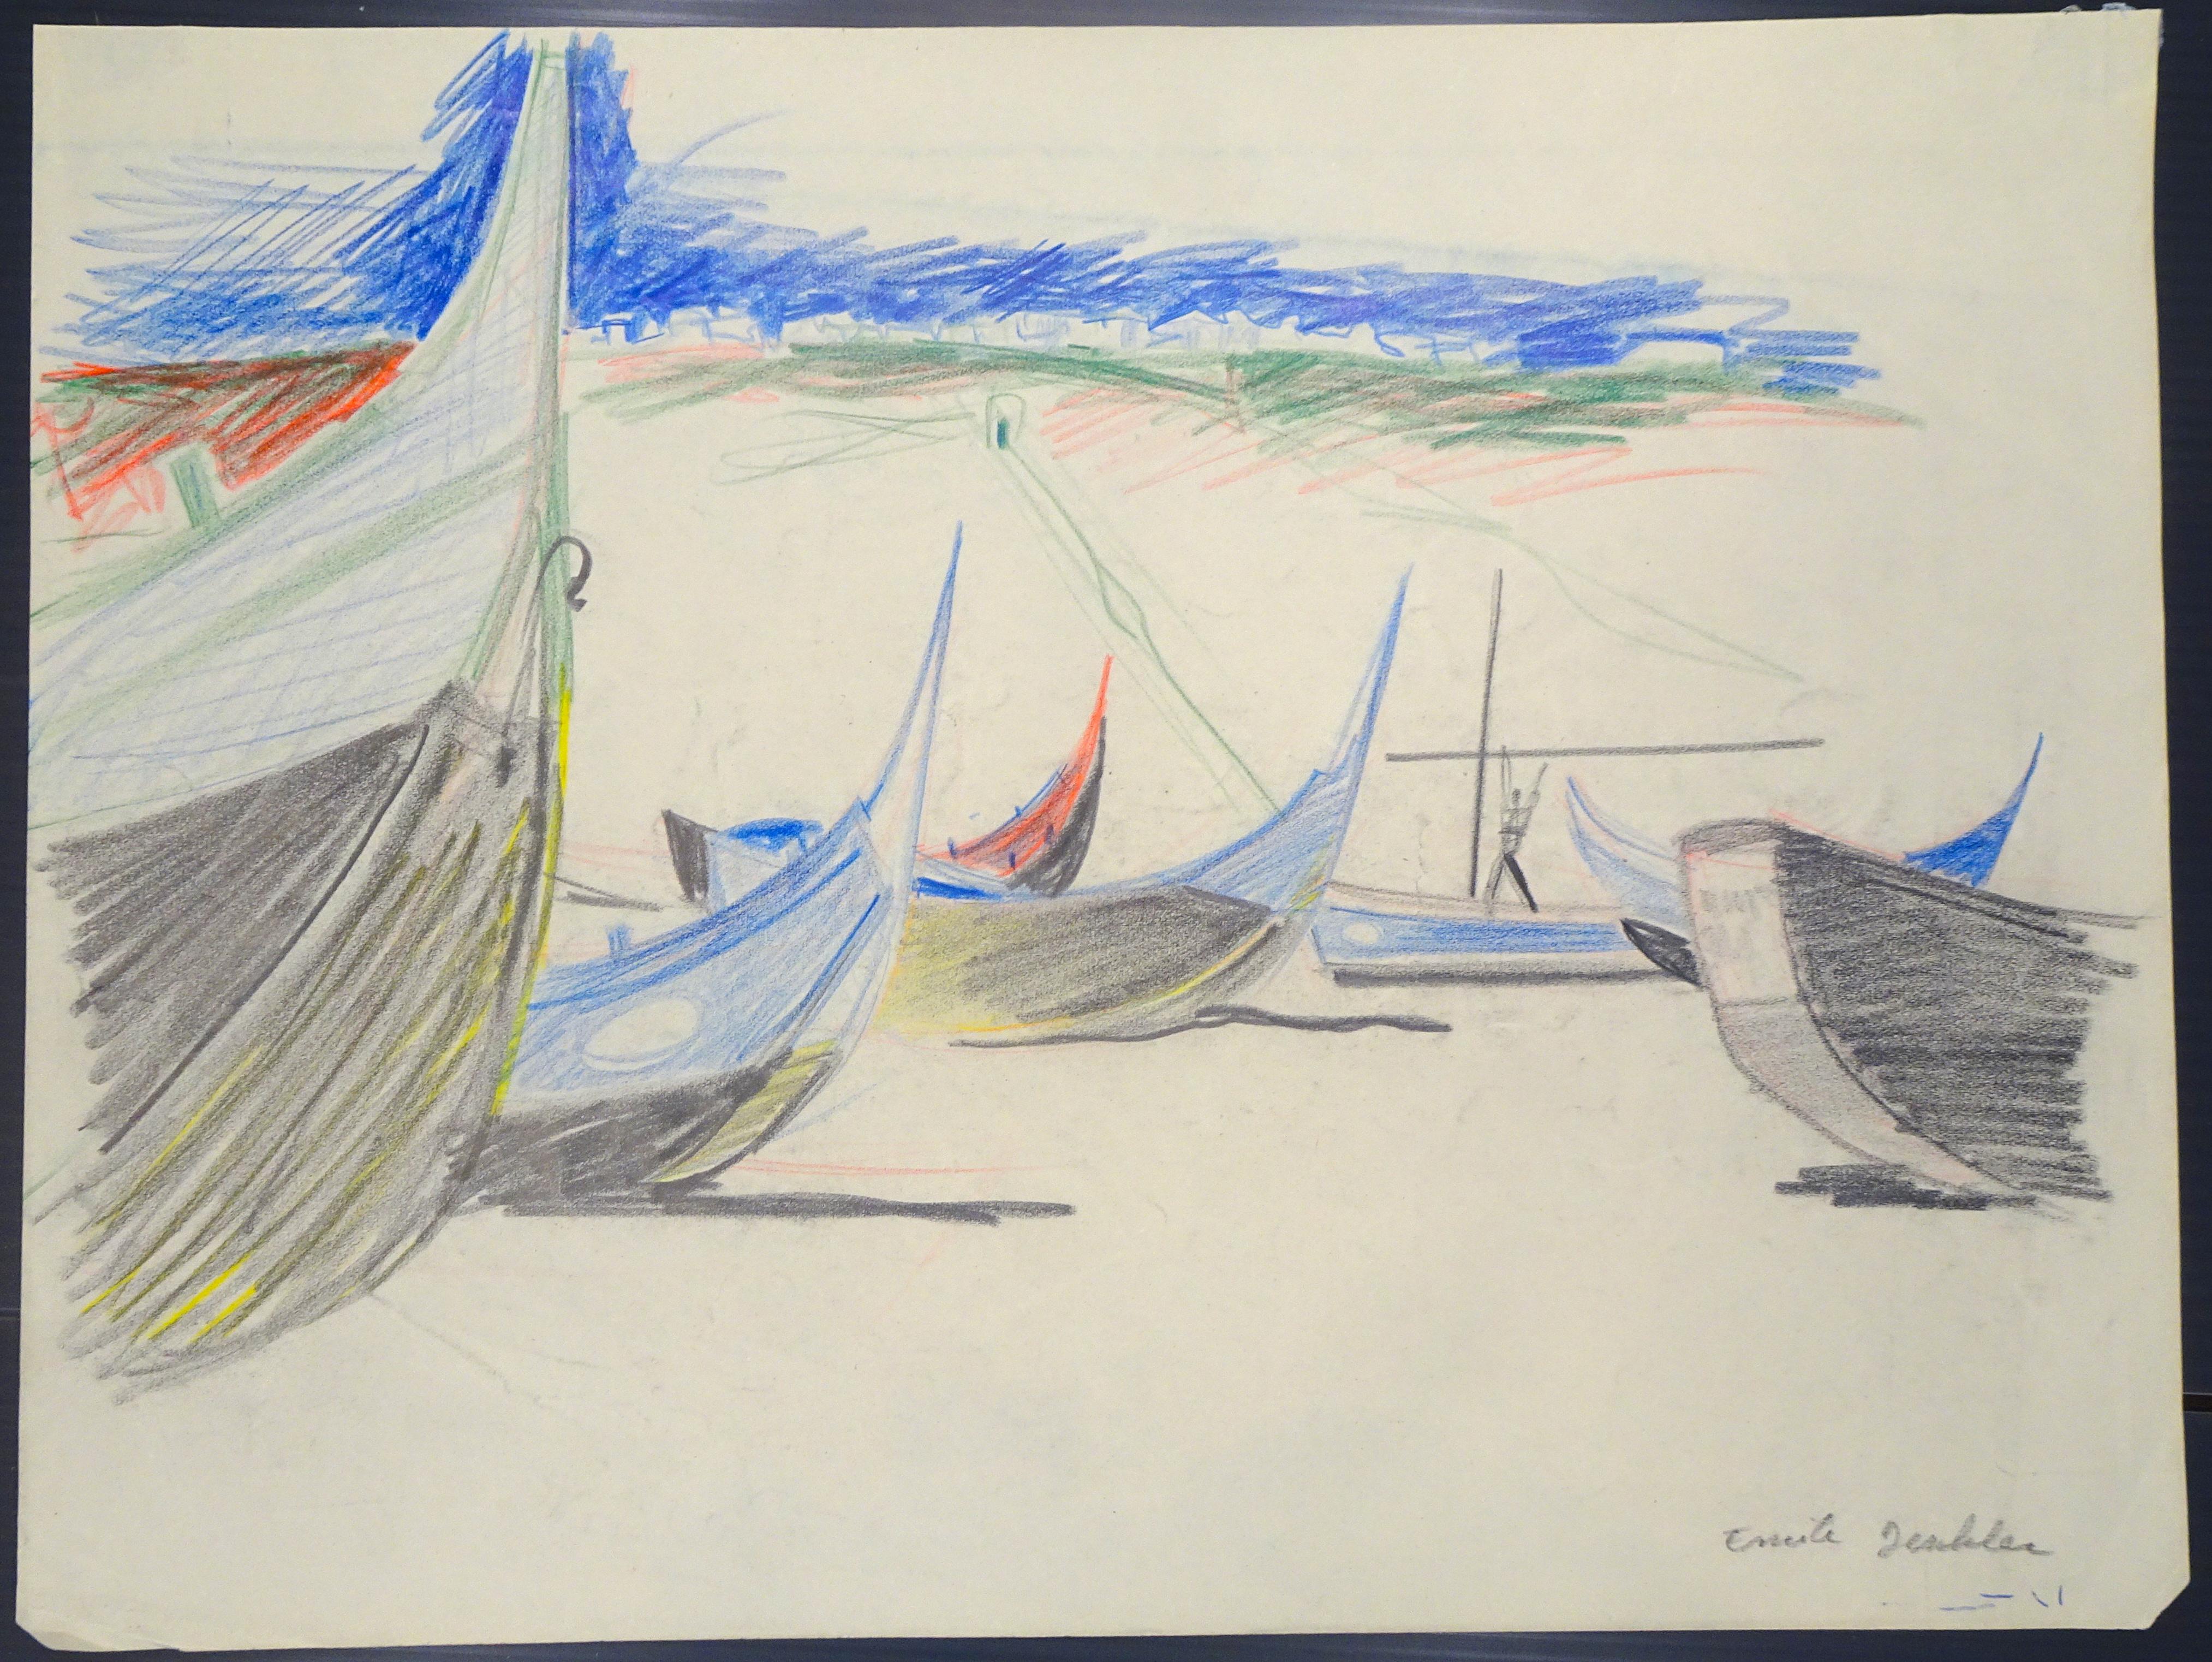 Boats is an original artwork realized by Emile Deschler in the 1980s.

Colored pastel on paper.

Hand-signed by the artist on the lower right corner.

Very good conditions except for a fold on the lower margin.

Very fresh and colored representation